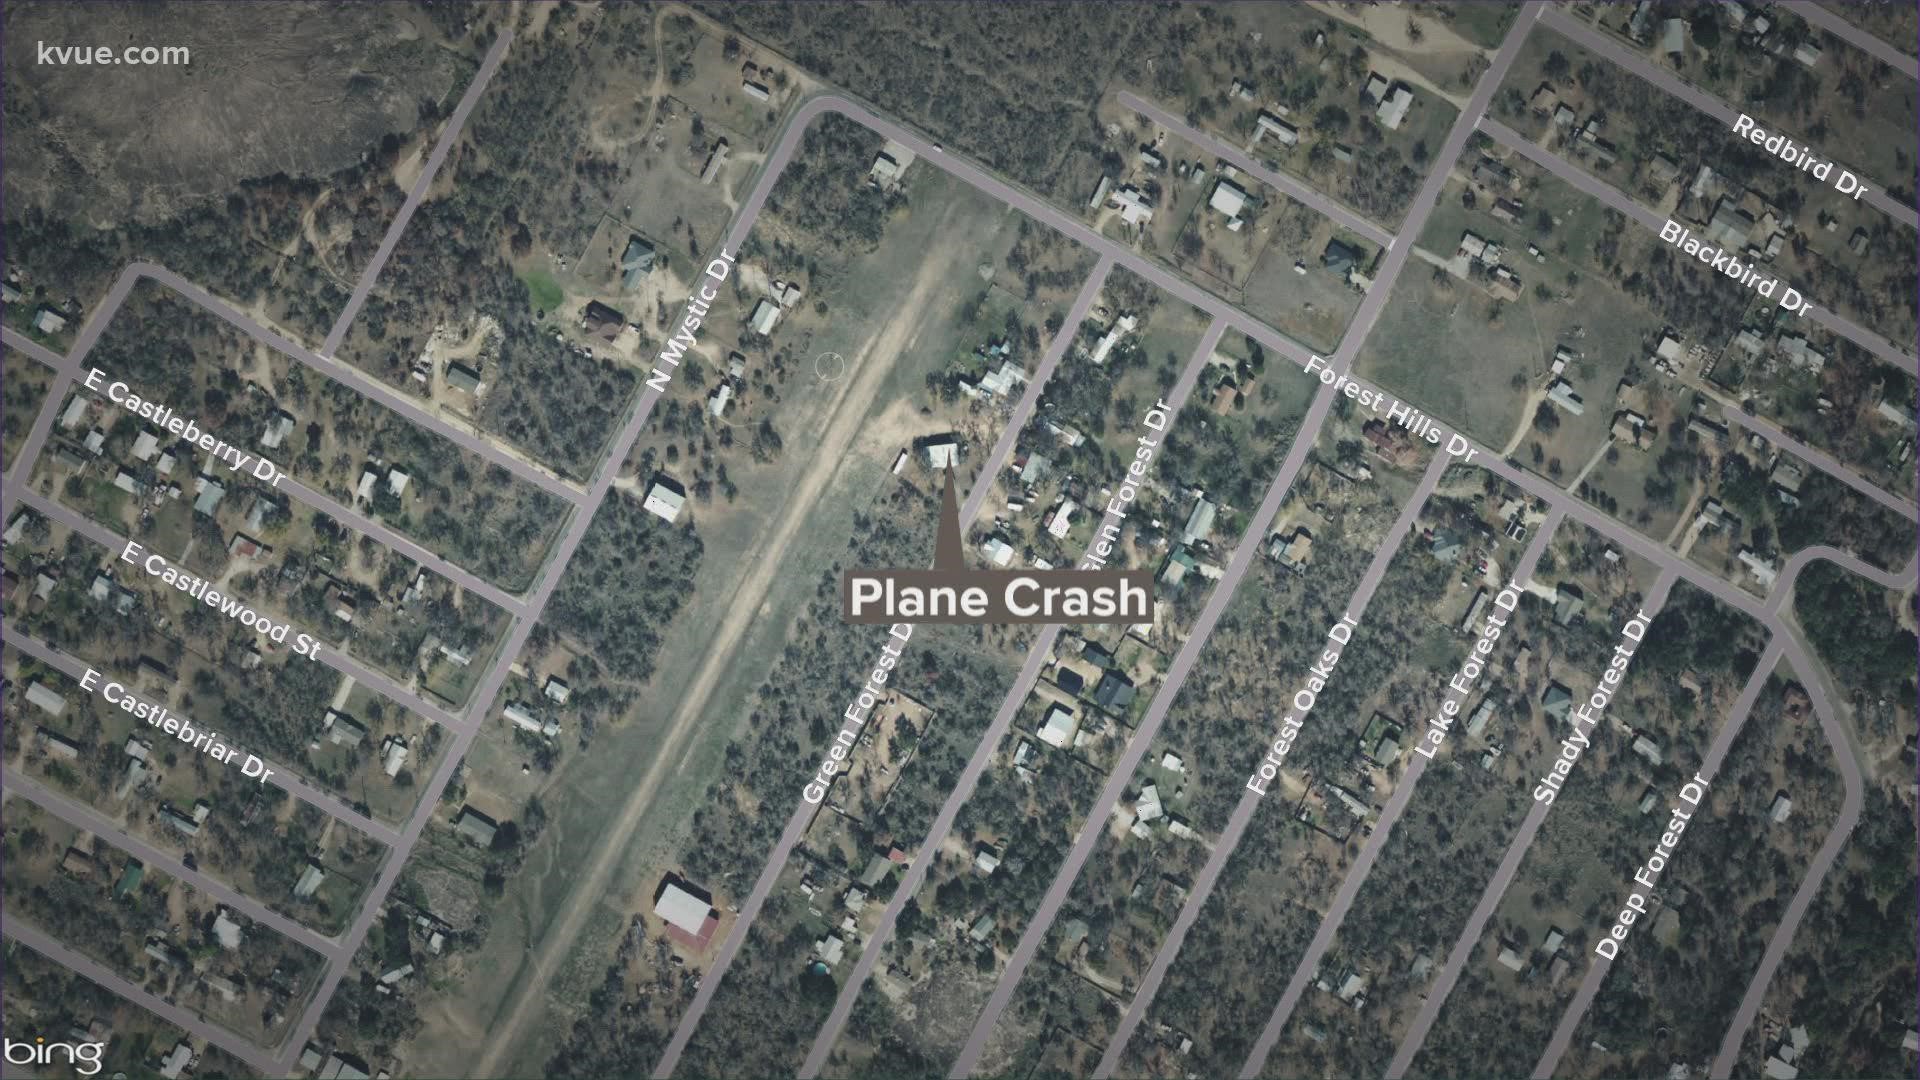 The Granite Shoals Police Department said the “aircraft emergency” happened just off the Granite Shoals airfield.